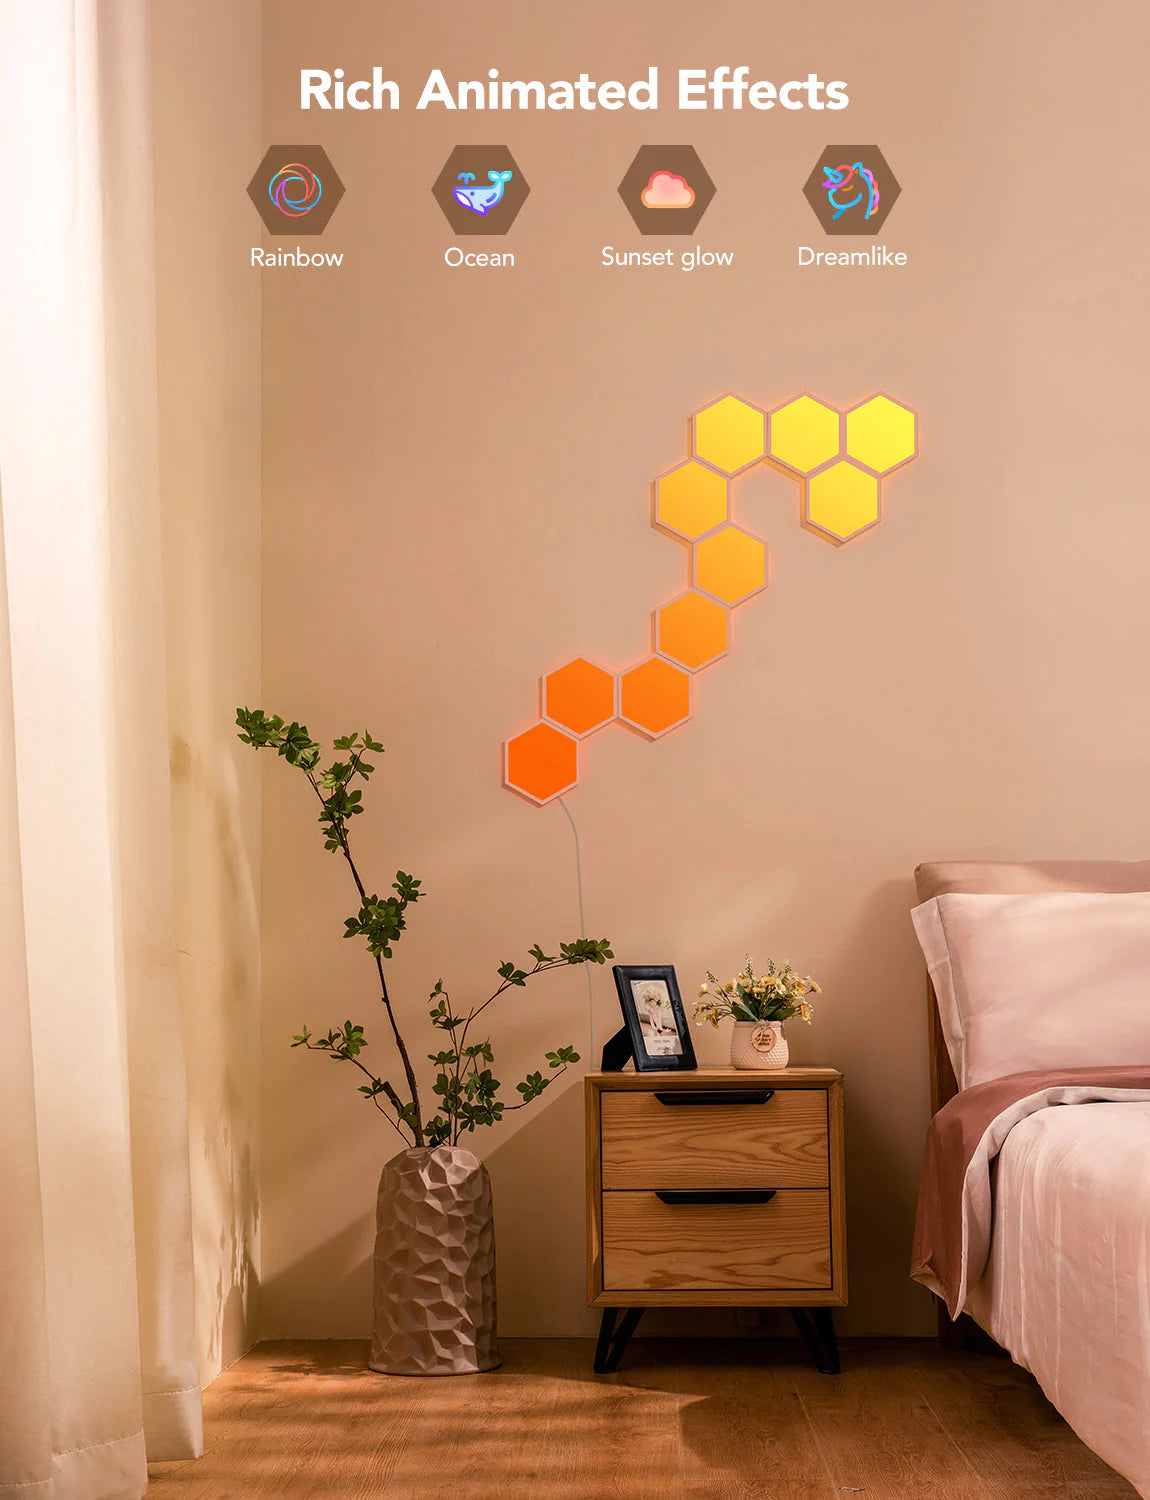 Govee Glide Hexa Light Panels (10PCS) - Smart RGBIC LED Panels for Gaming & Ambiance